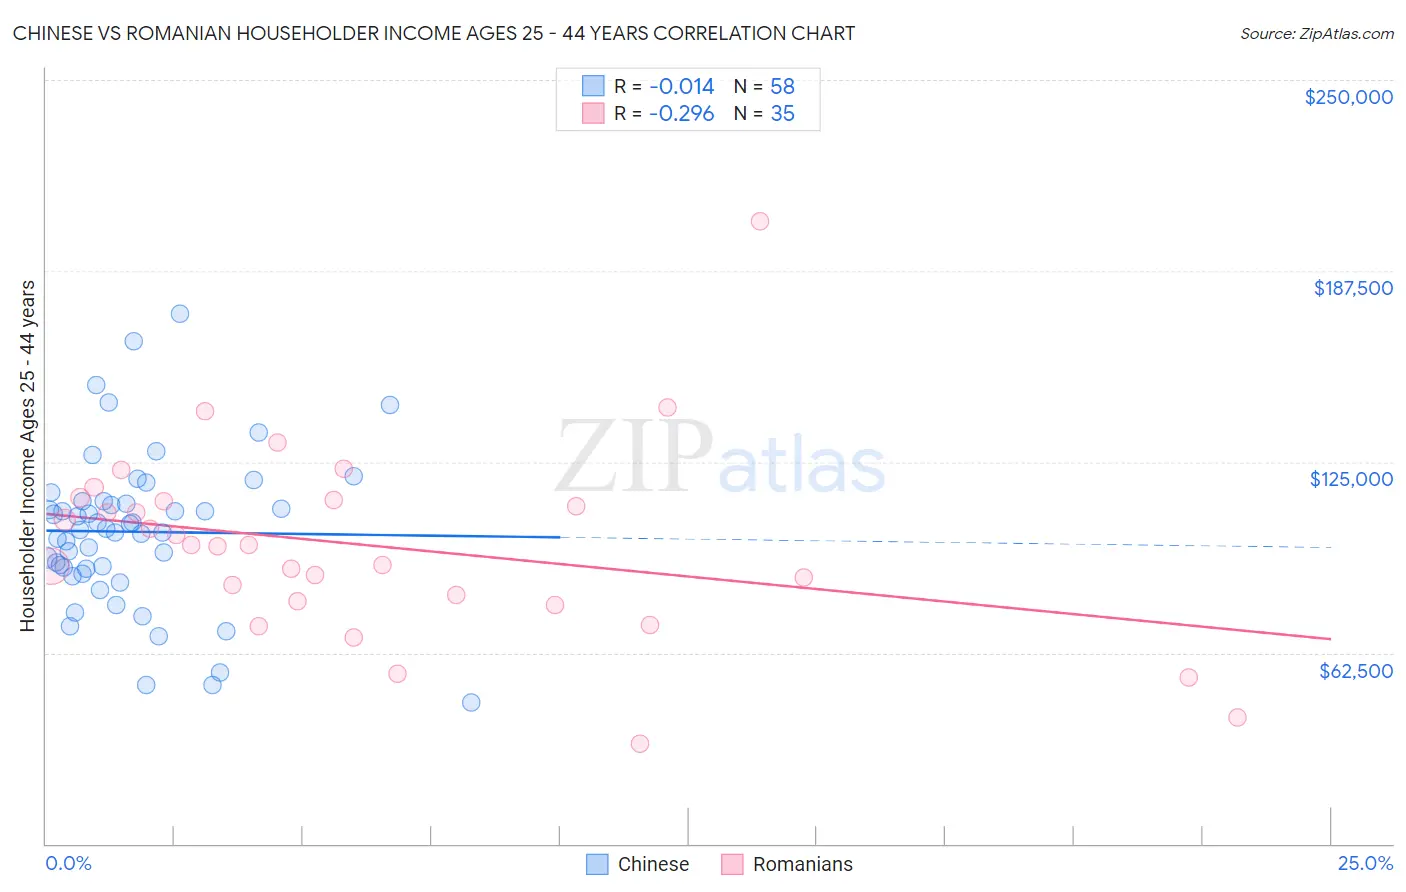 Chinese vs Romanian Householder Income Ages 25 - 44 years